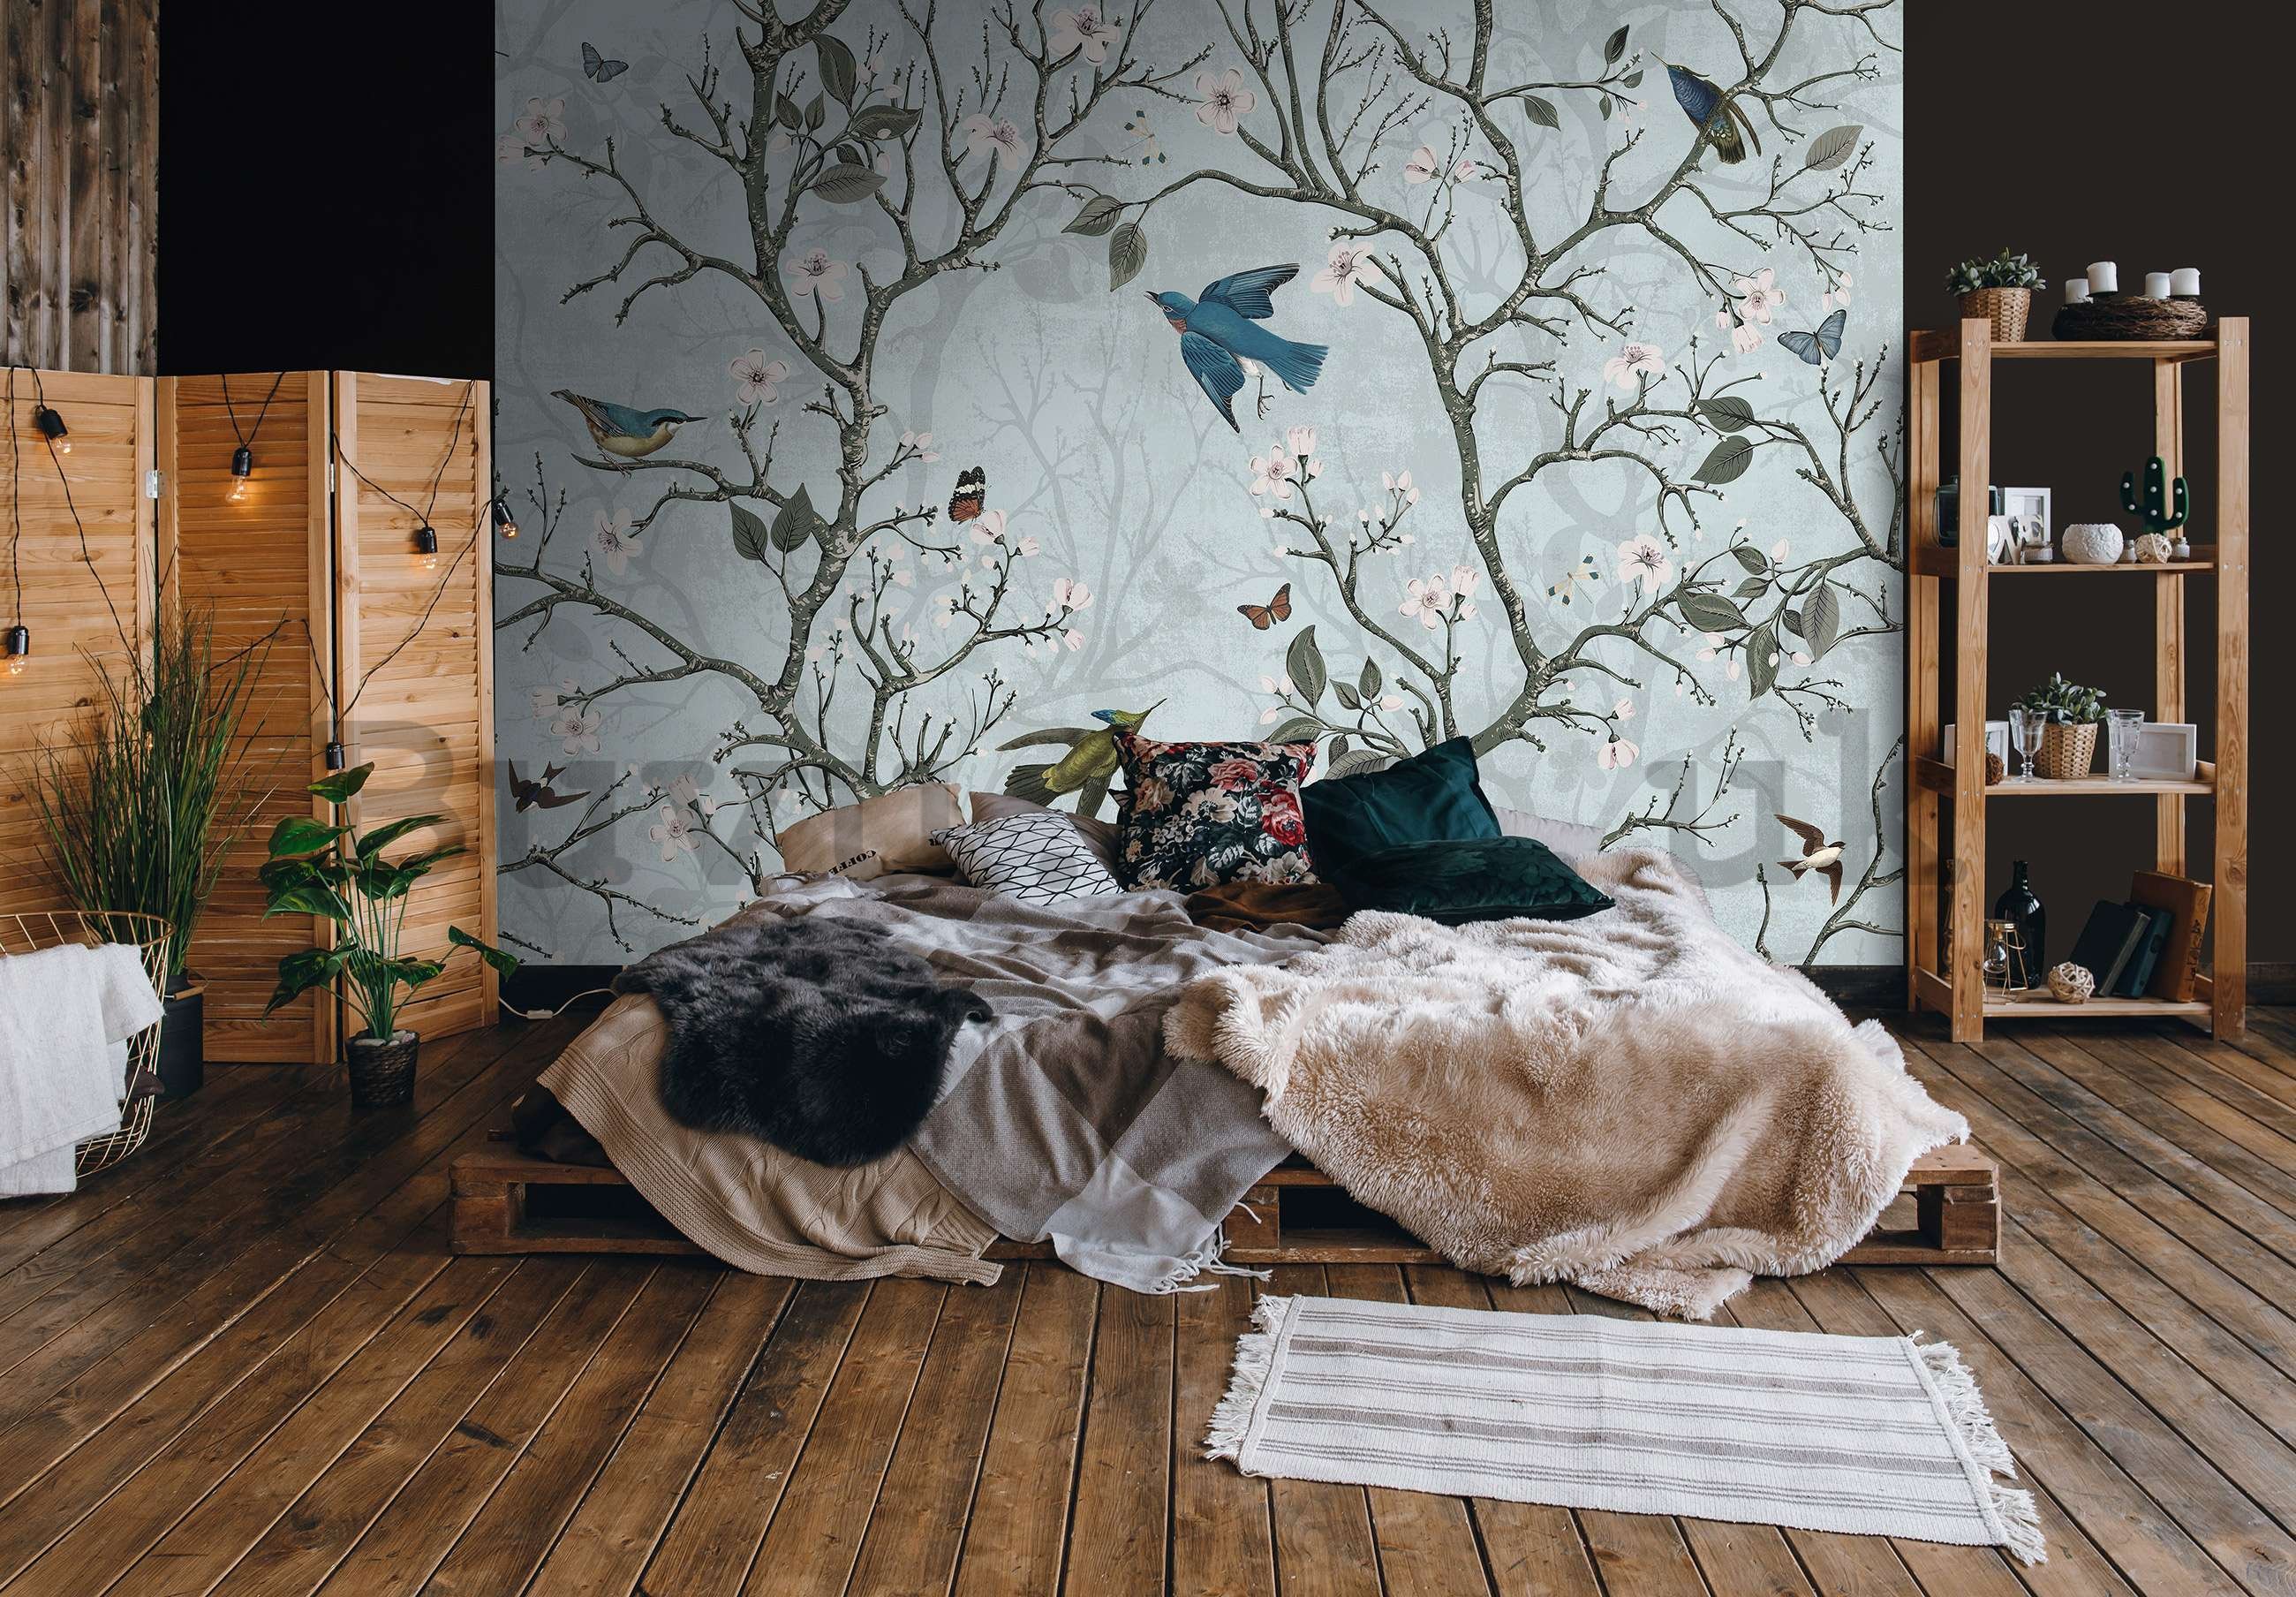 Wall mural vlies: Birds and Trees (animated) - 254x184 cm